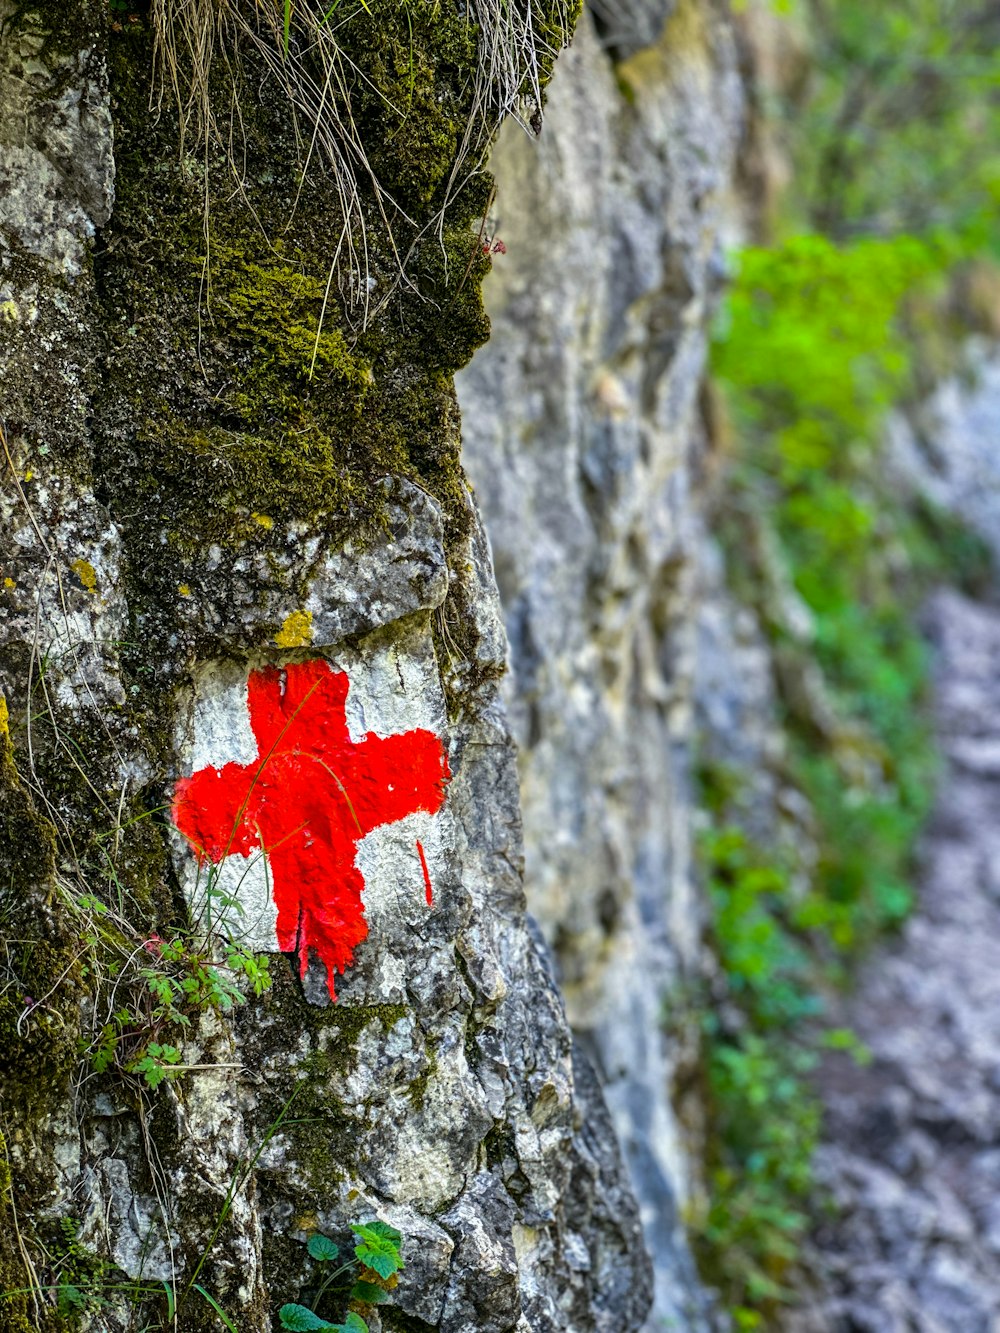 a red and white cross painted on a rock